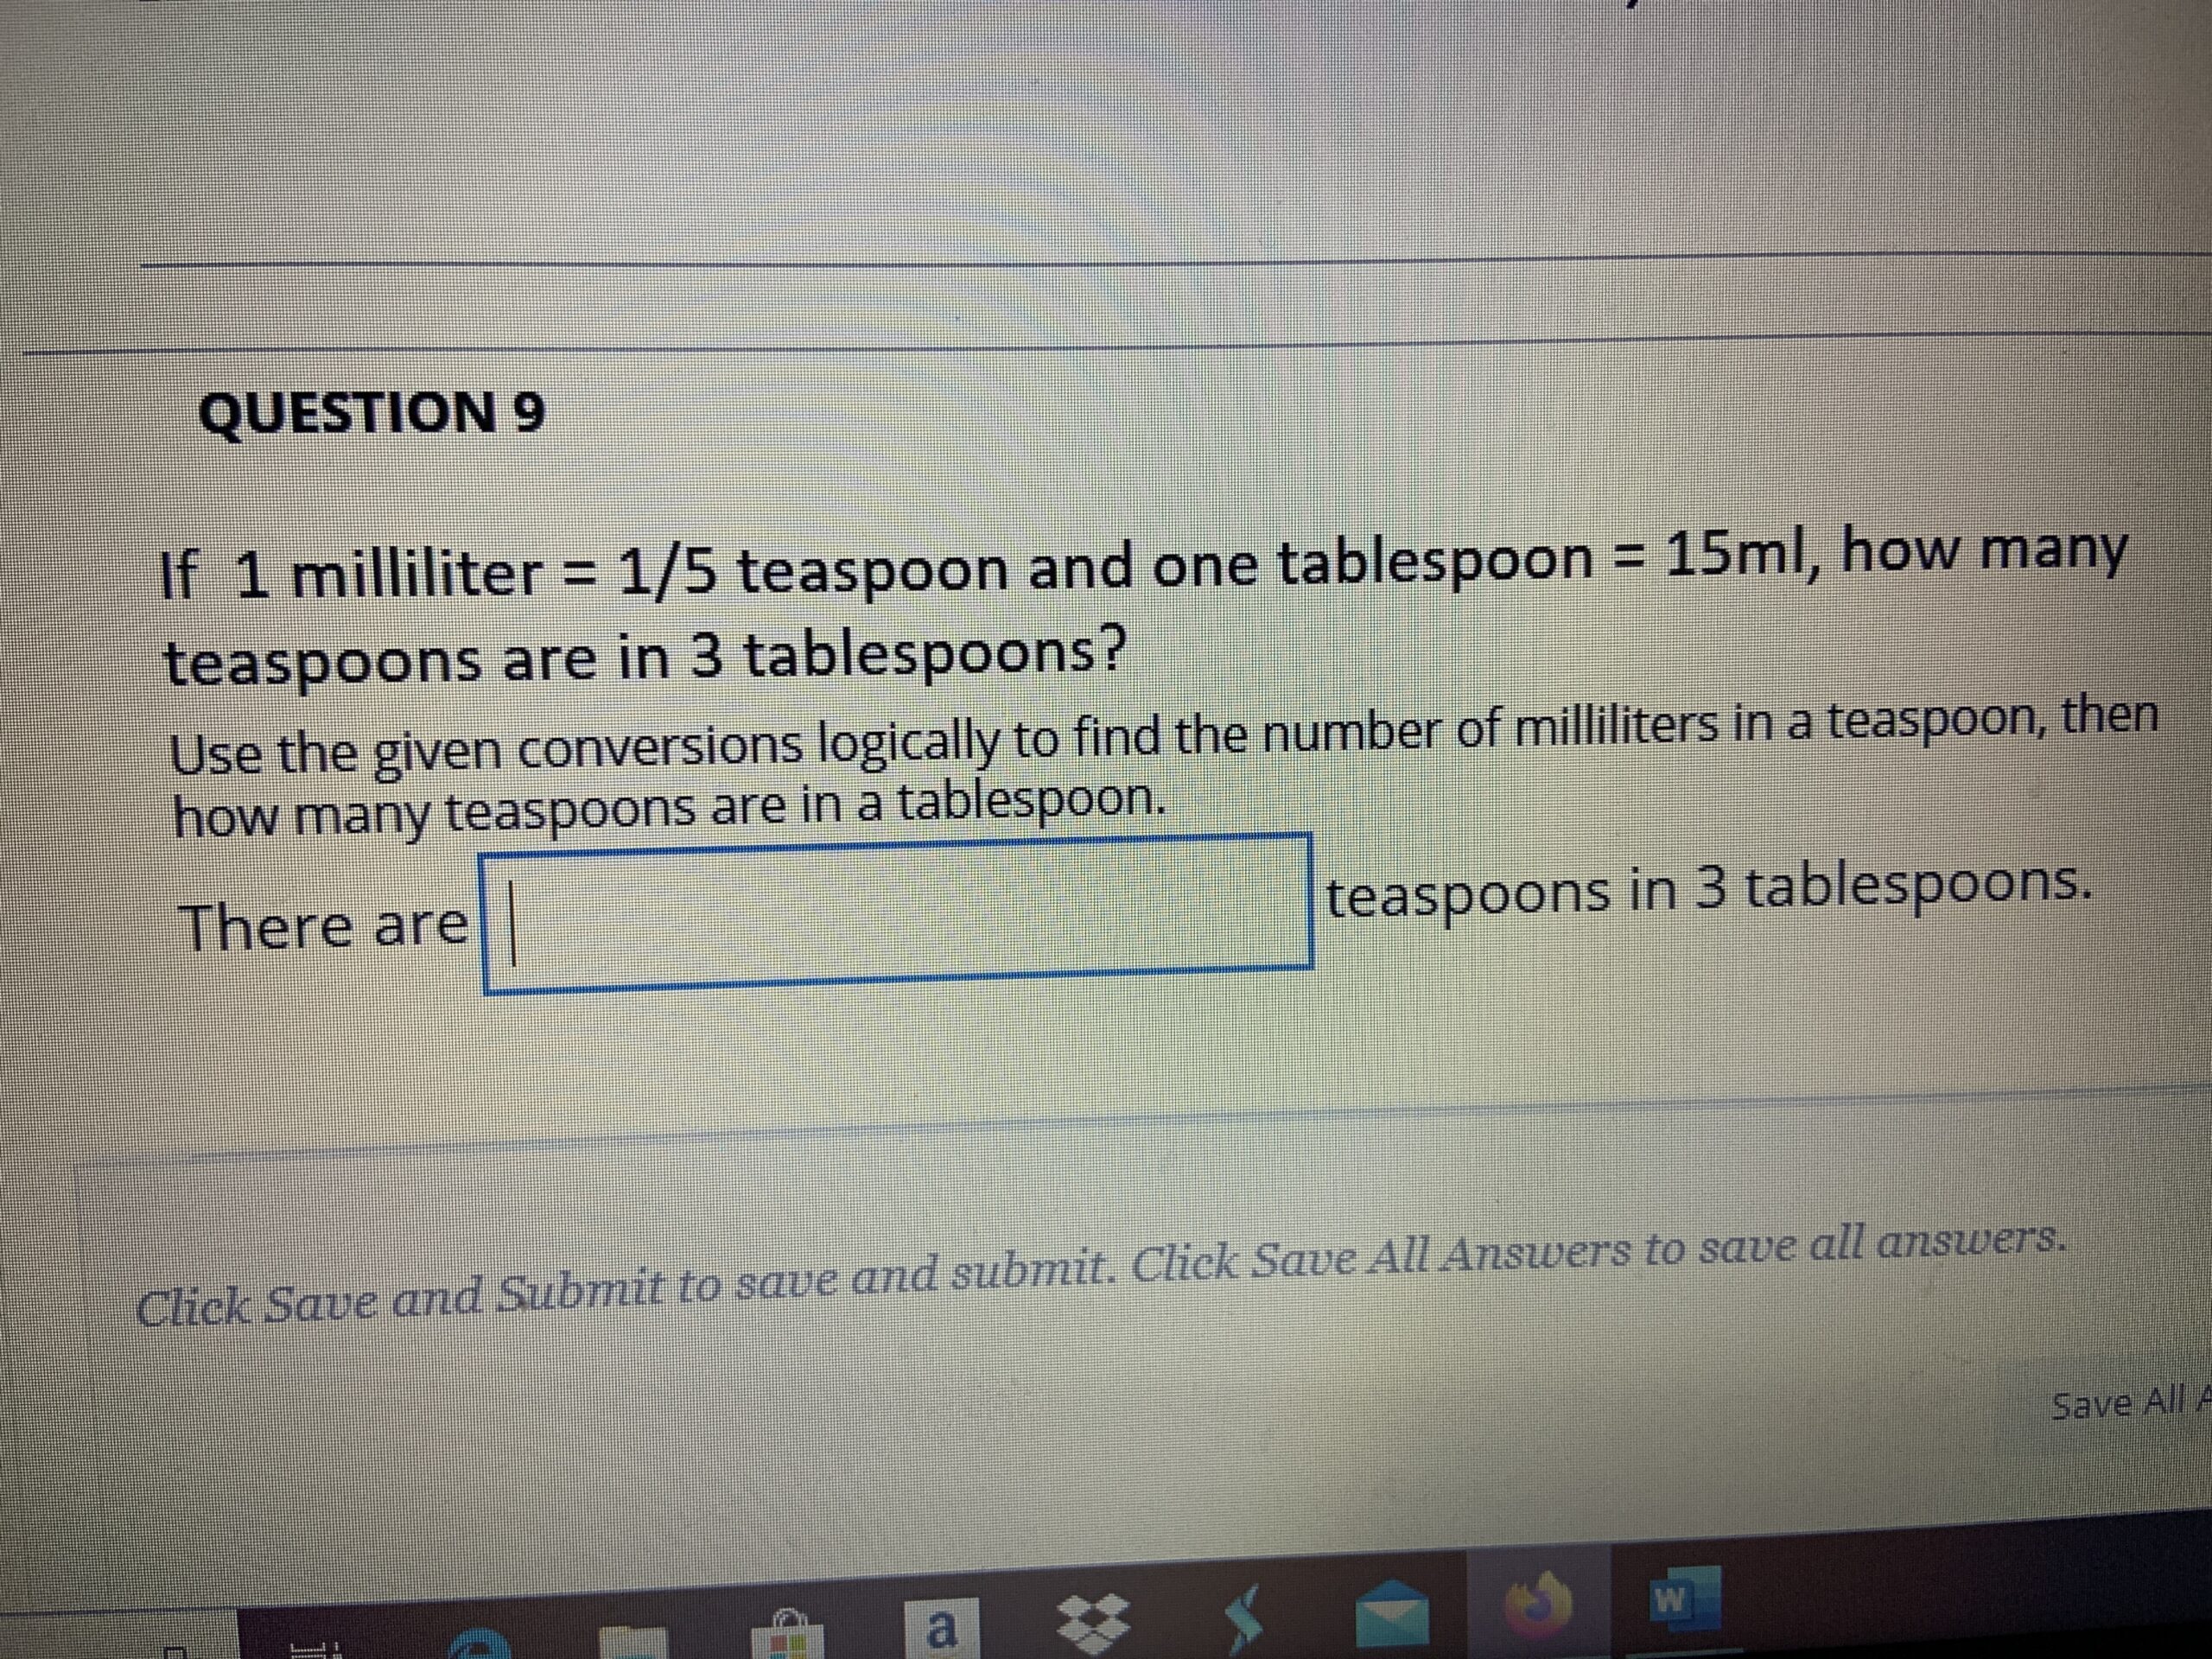 If 1 milliliter = 1/5 teaspoon and one tablespoon = 15ml, how many teaspoons are in 3 tablespoons?